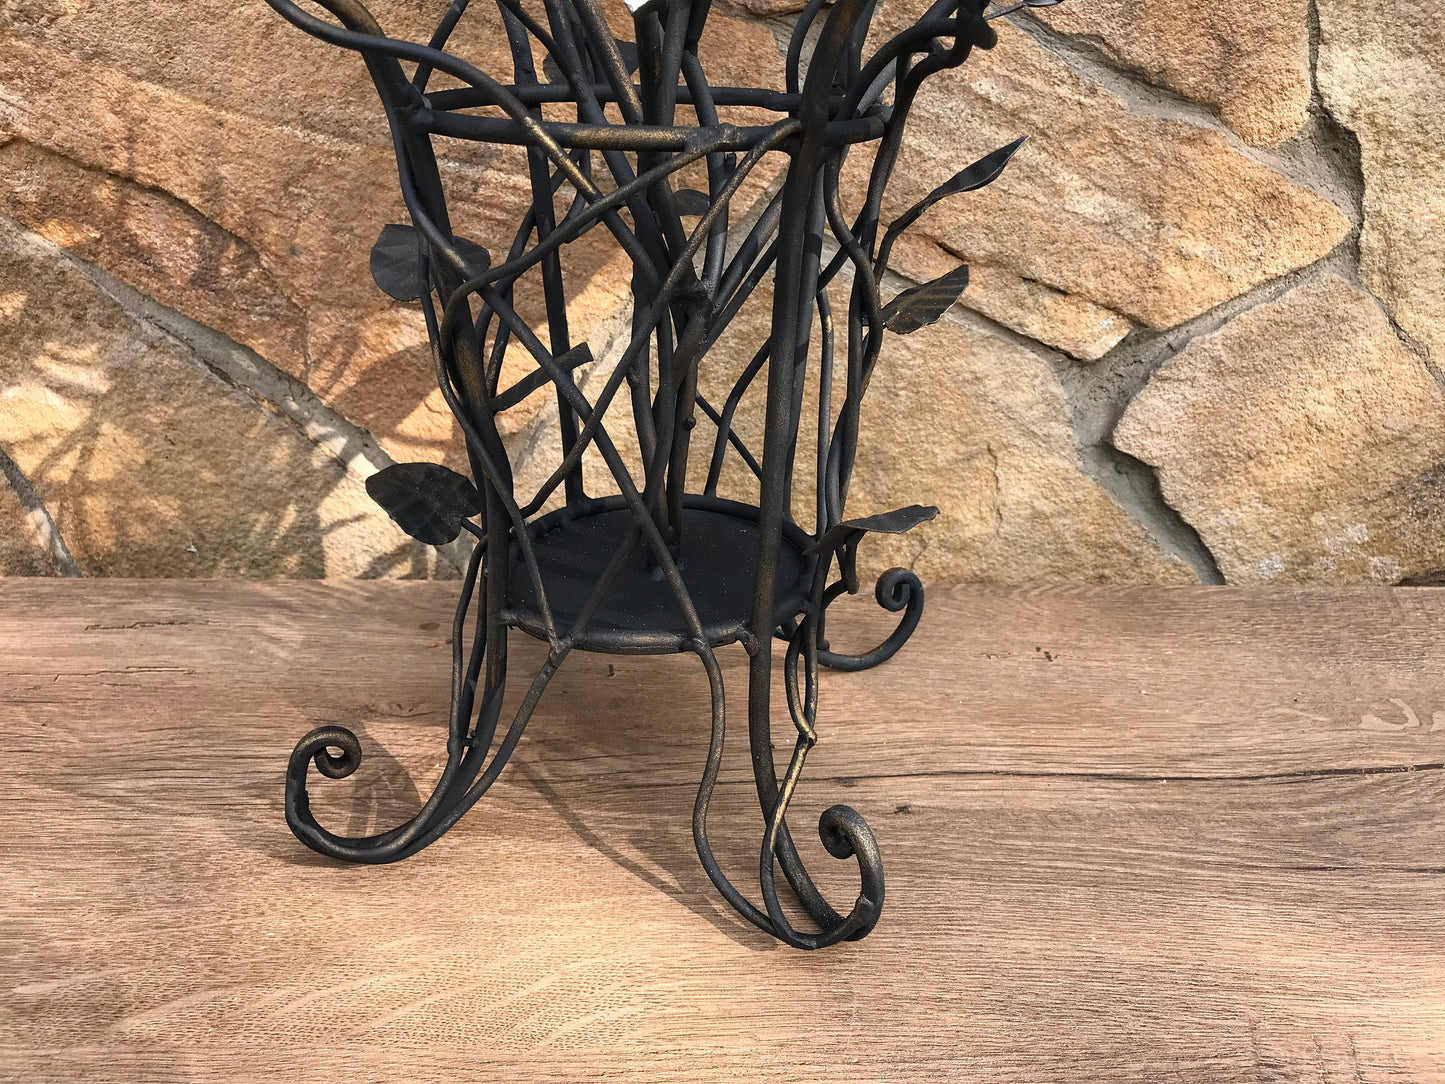 Hand forged rose, metal rose, Christmas gift, iron gift for her, wedding anniversary gift, Mother's day gift,  birthday gift, metal bouquet